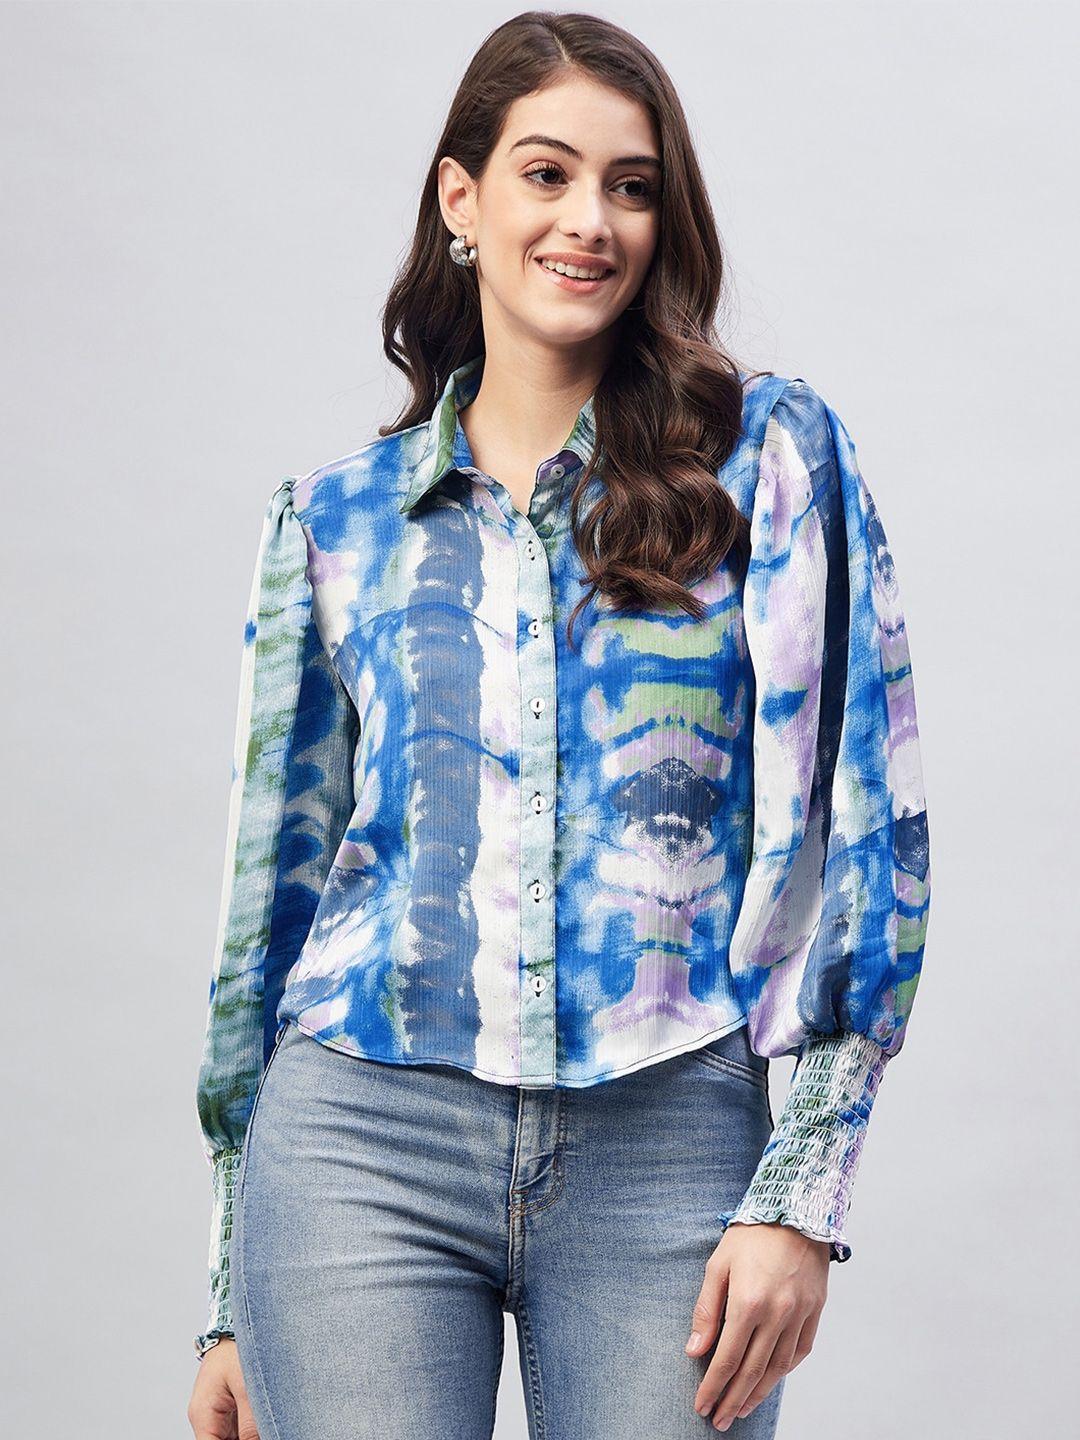 marie claire blue print shirt style top